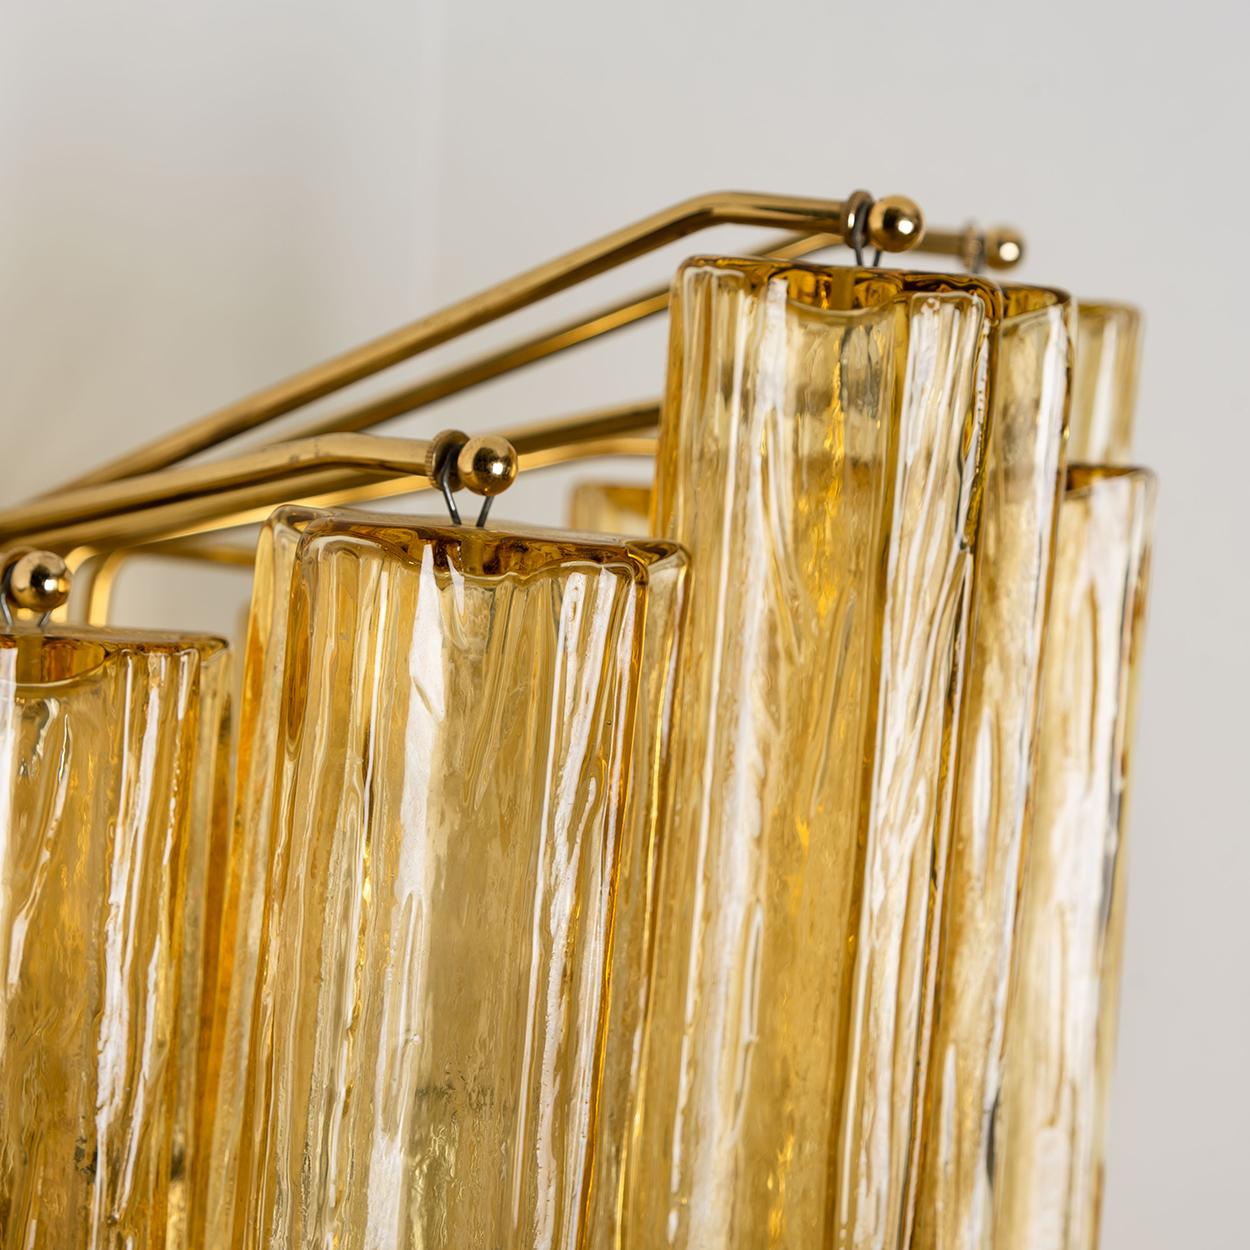 Wonderful extra-large mid century Barovier & Toso wall sconces. This wall sconces are executed to a very high standard. The lights feature a frame with five large Murano tubes in ocher glass. The tubes diffuse the light beautifully to give a soft,